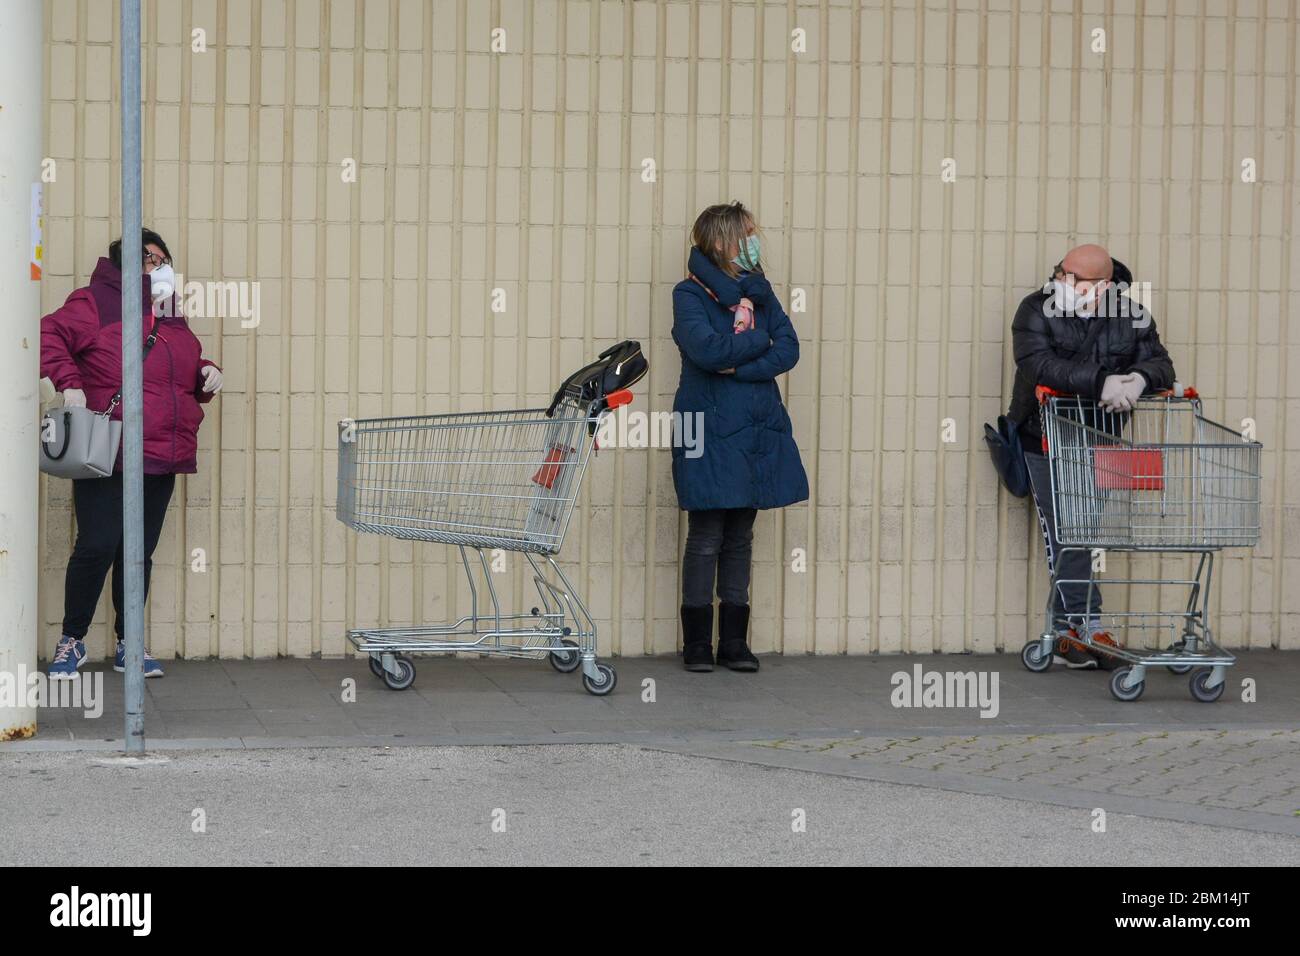 Toscana, Italy 03/27/20 - Customers wearing coronavirus protection masks in line with shopping carts, standing against a white wall. People chatting Stock Photo